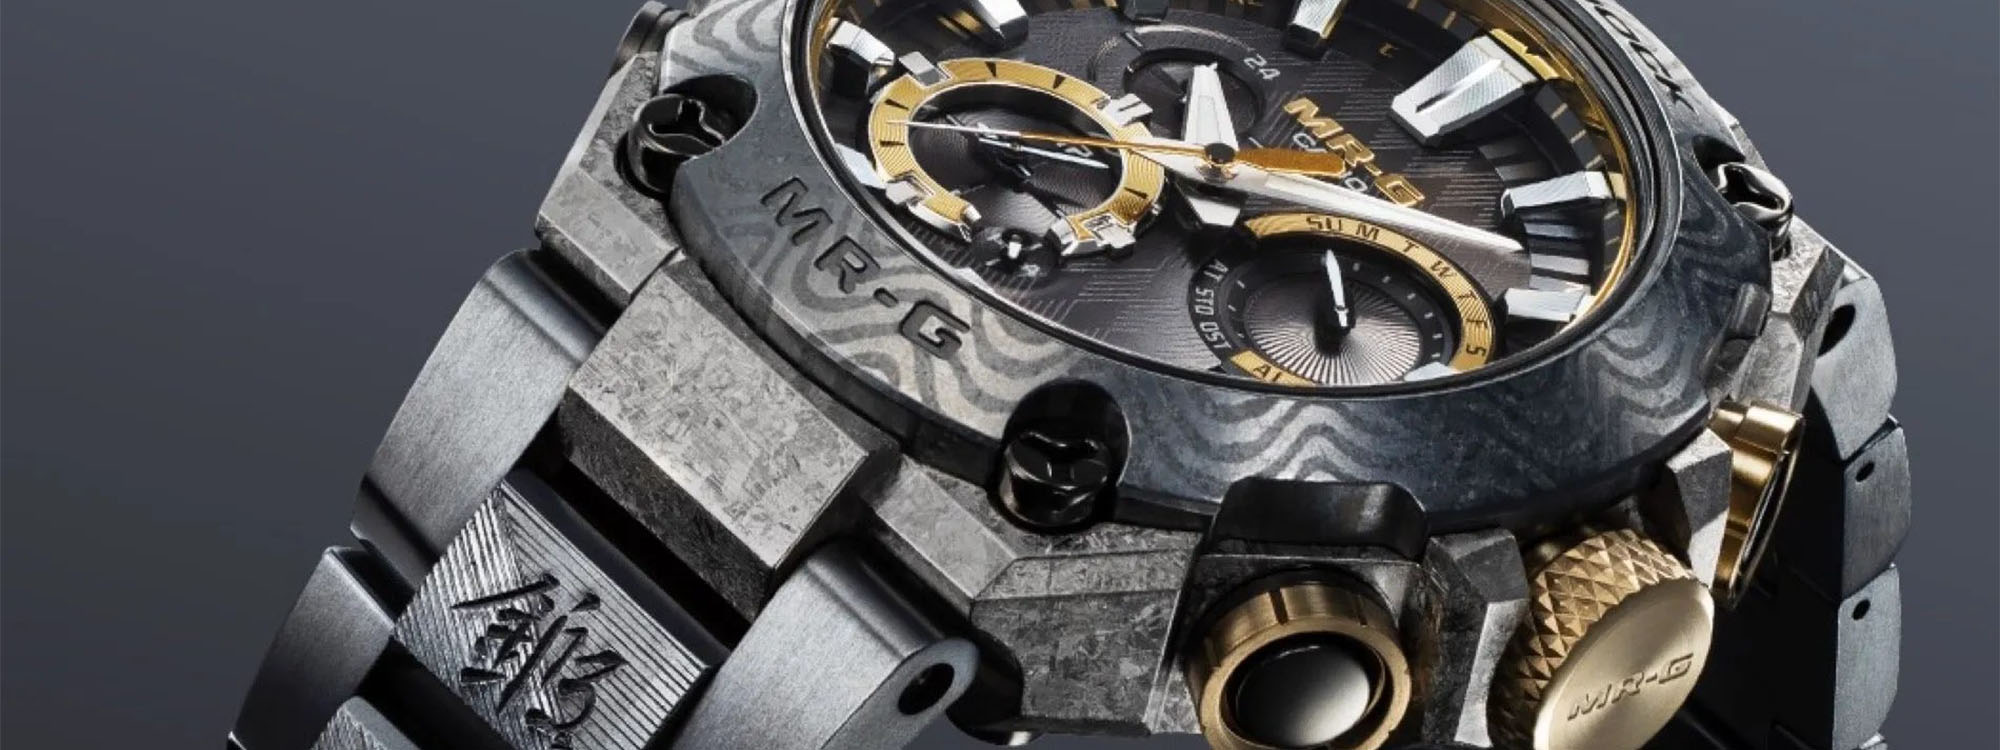 Counting Down the 5 Most Expensive G-Shock Watches